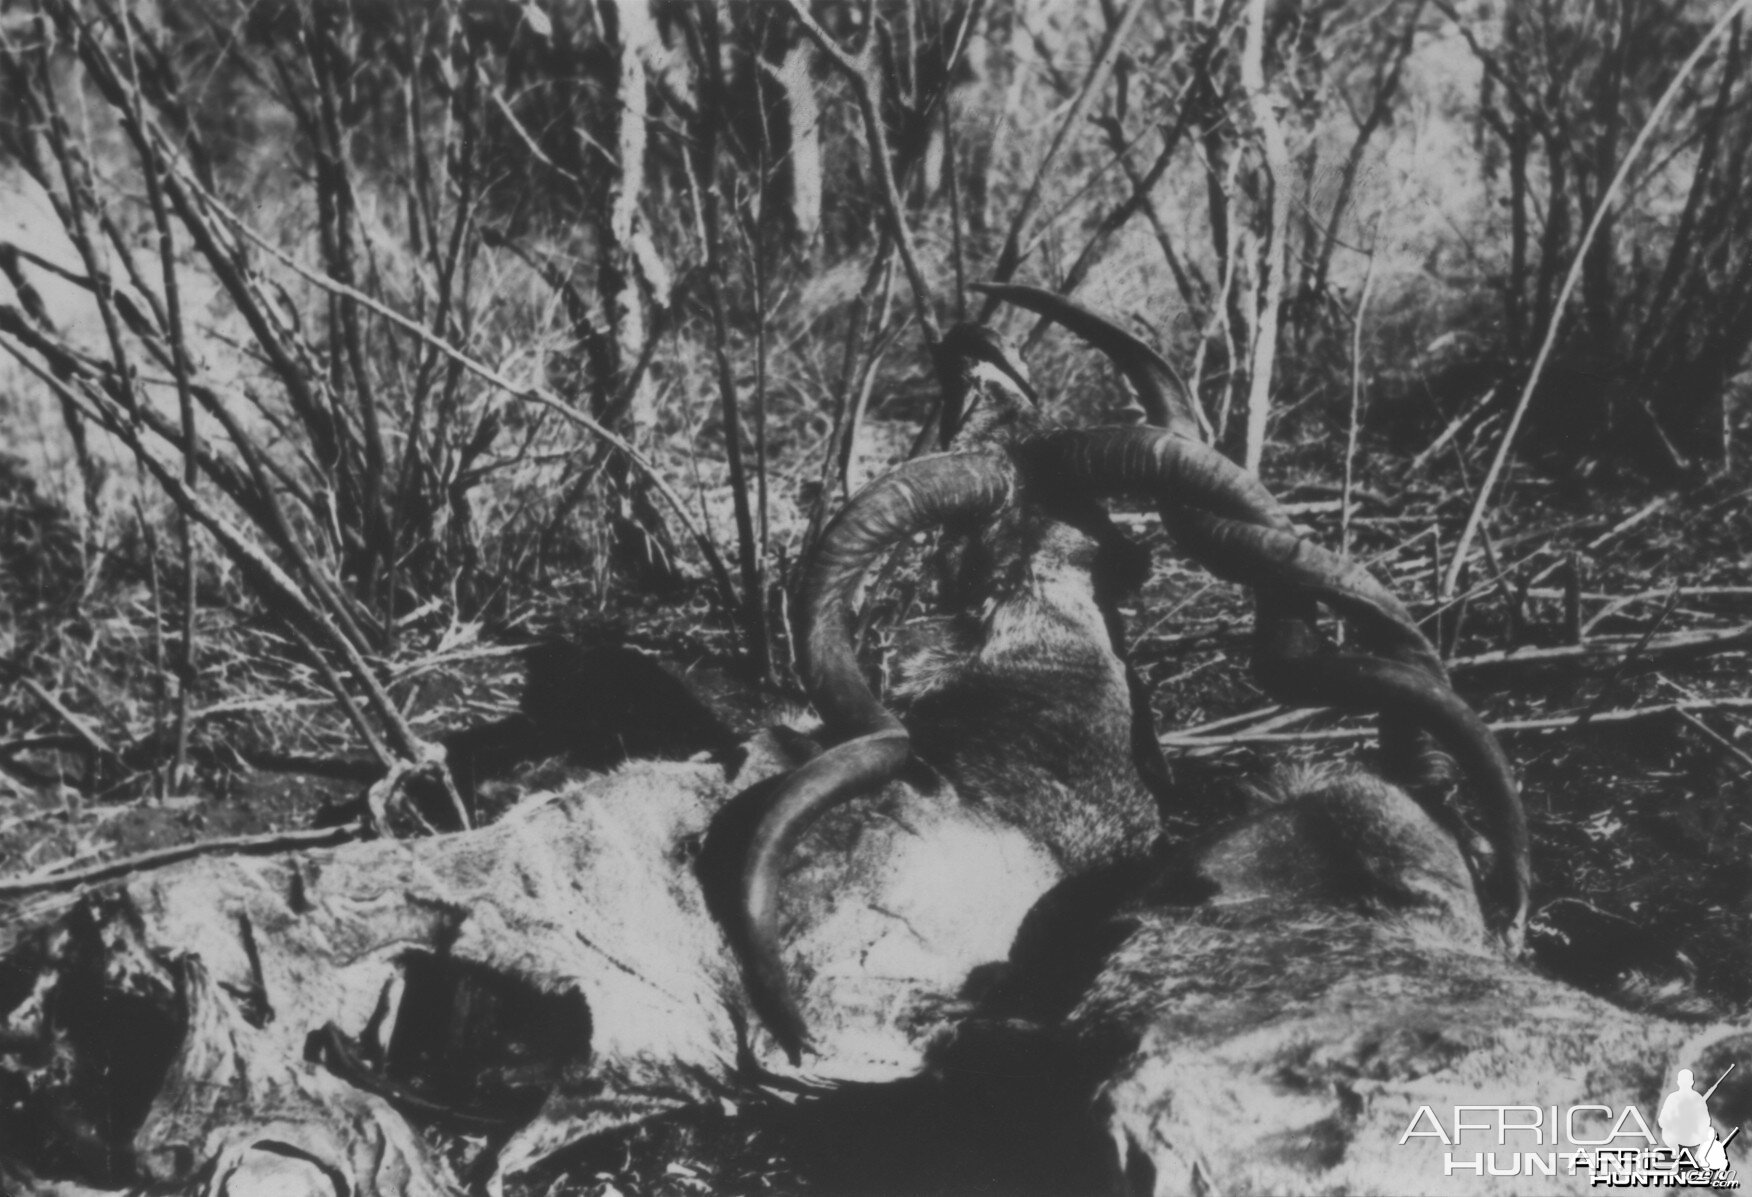 Remains of two Kudus that died from becoming interlocked